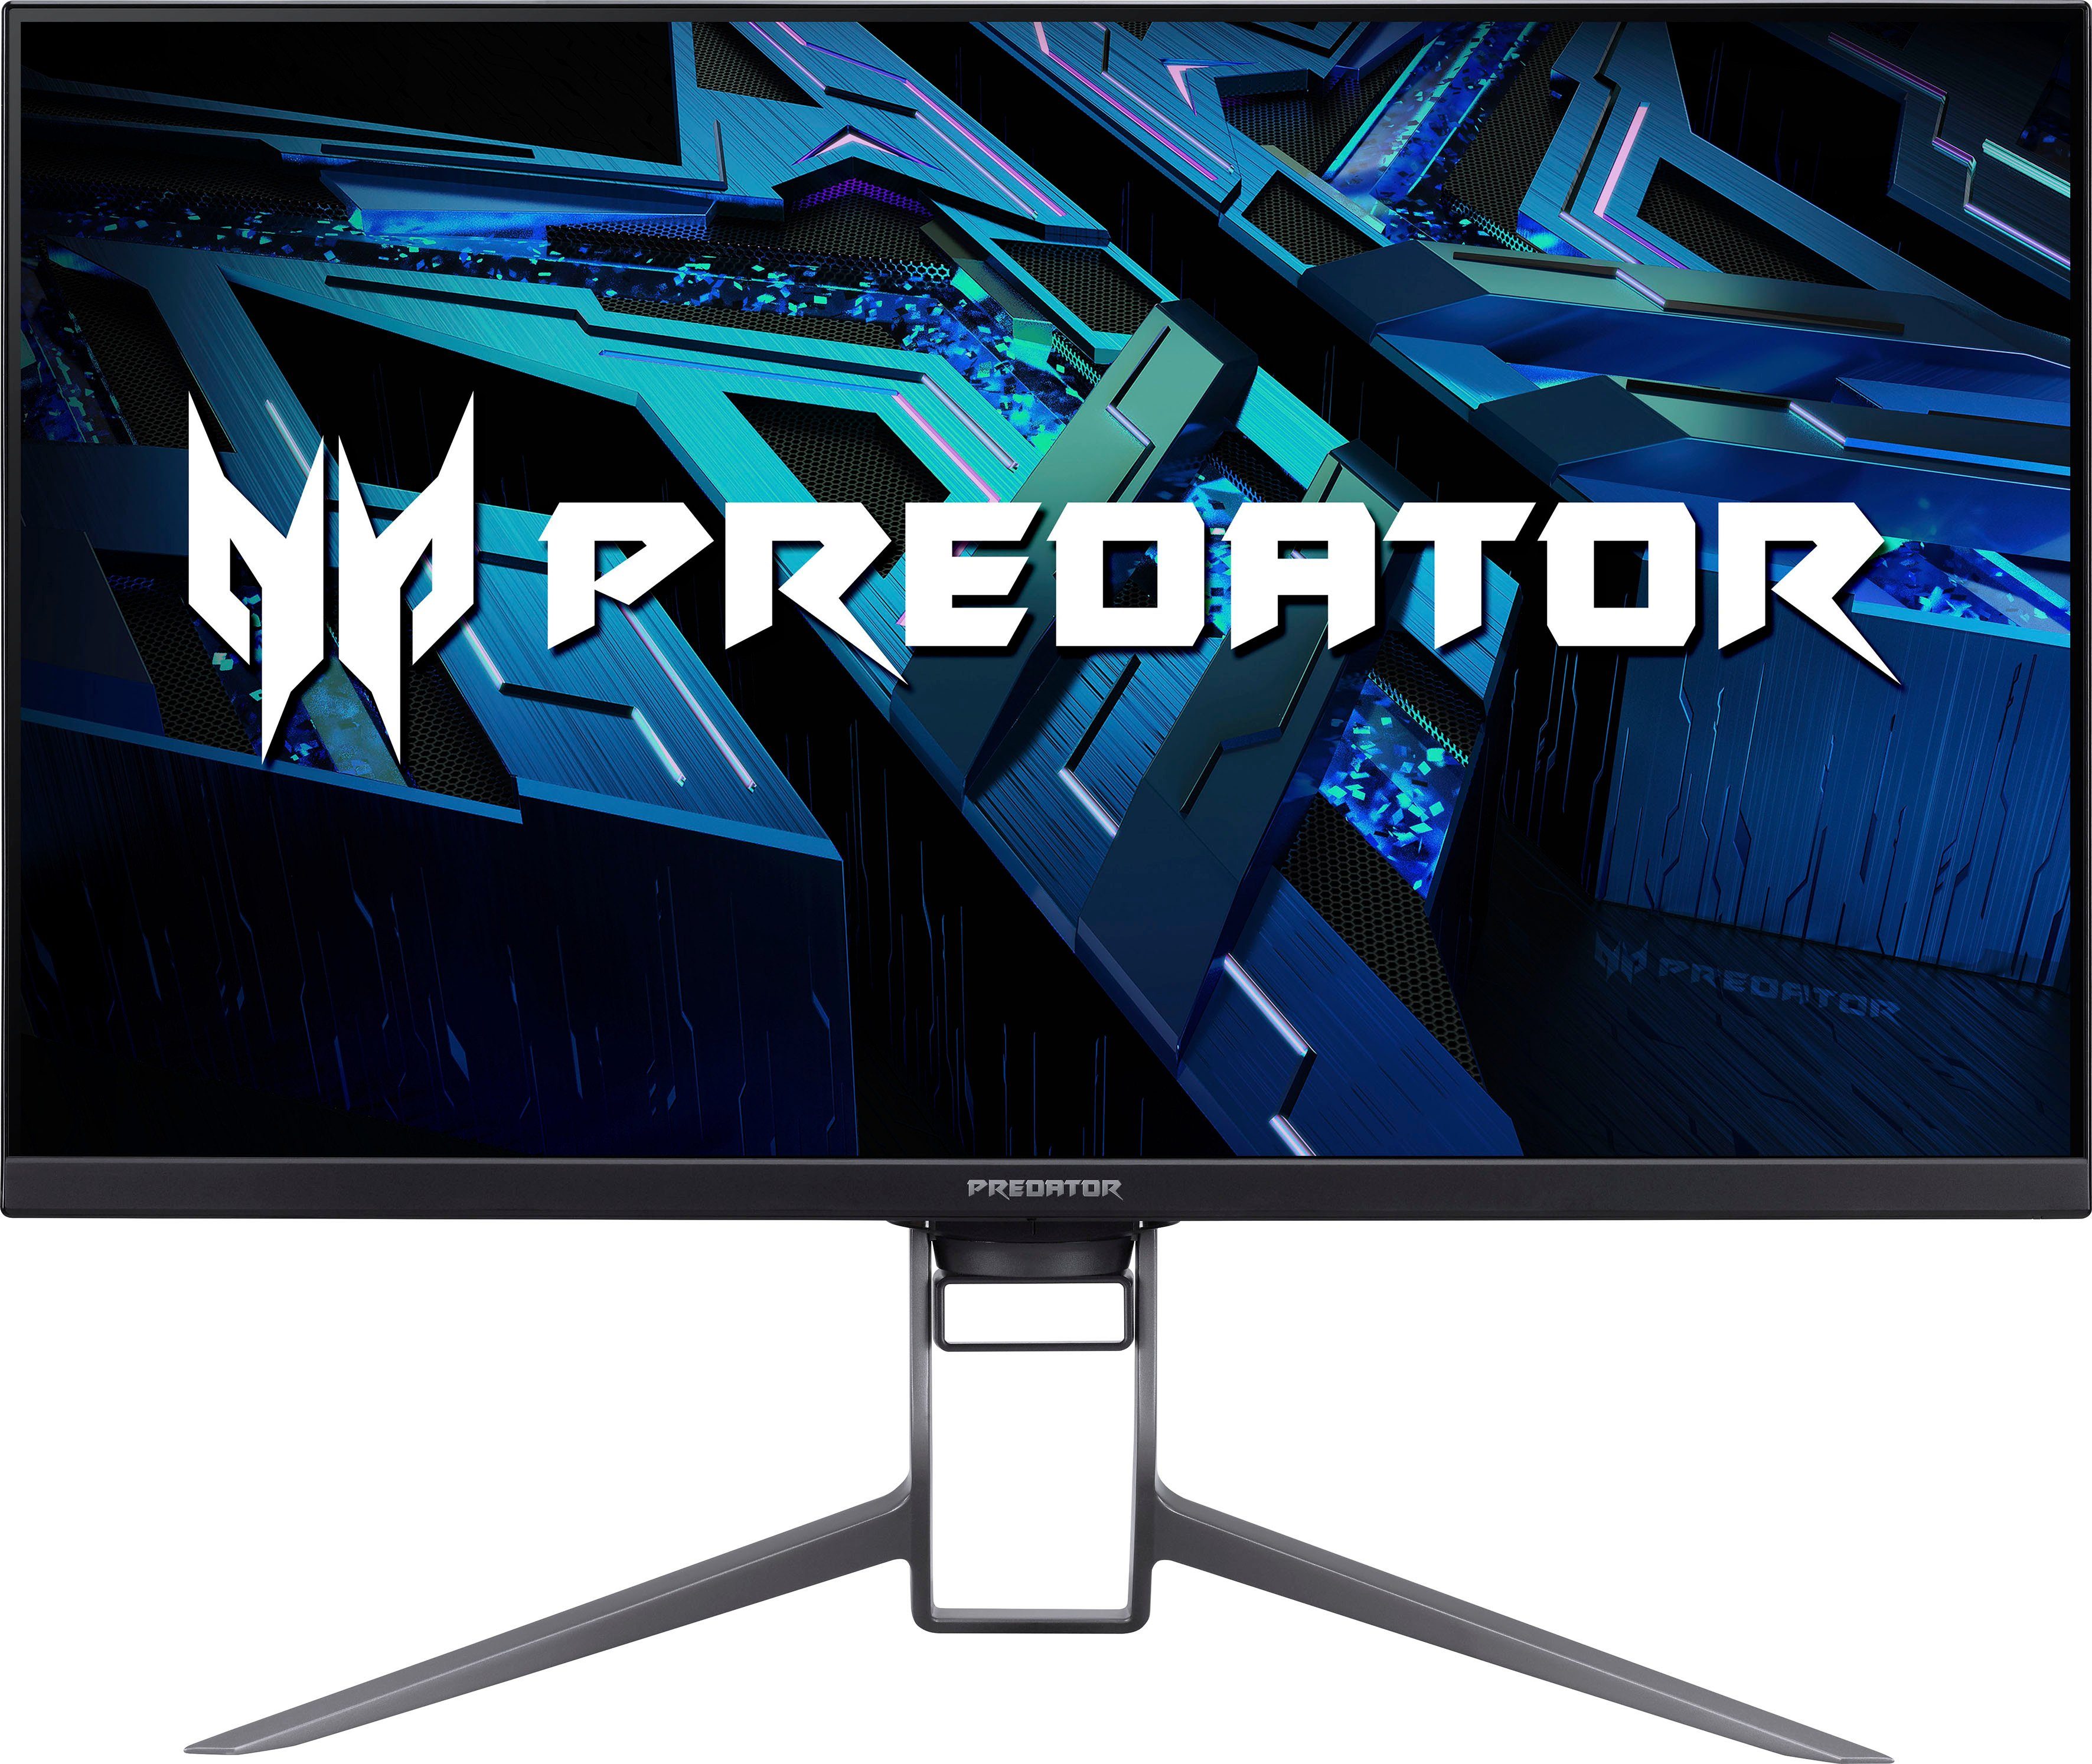 3840 Acer (81 0,7 Panel, Gaming-LED-Monitor Ultra X32 Reaktionszeit, HD, 160 miniLED ms Quantum 1000) FP Dot HDR LCD, ", 4K px, x cm/32 Predator Hz, 2160